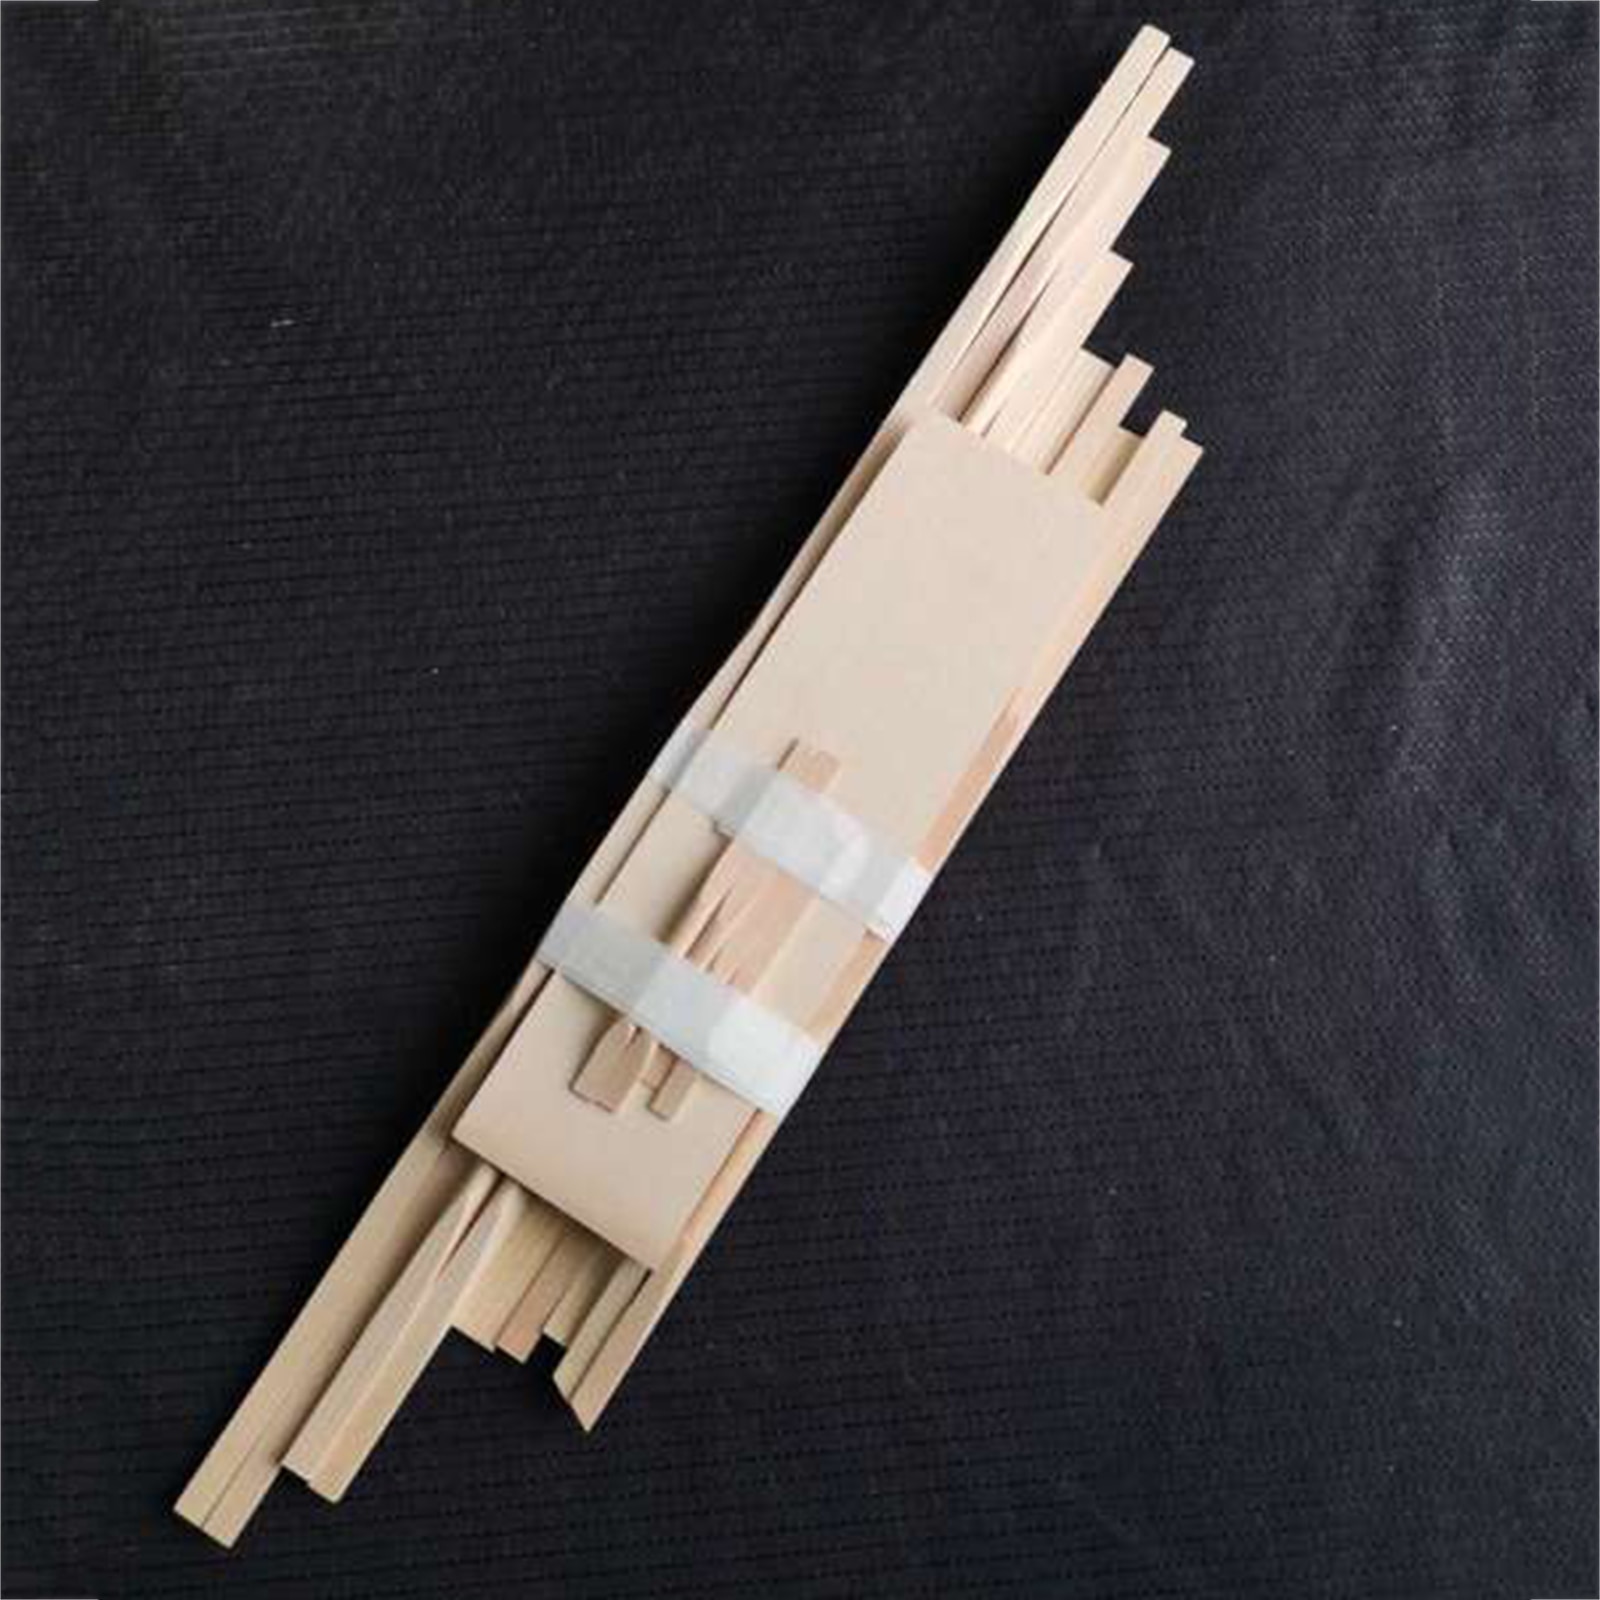 Spruce Brace Wood Kit for Acoustic Guitar Luthier Tools Material x12